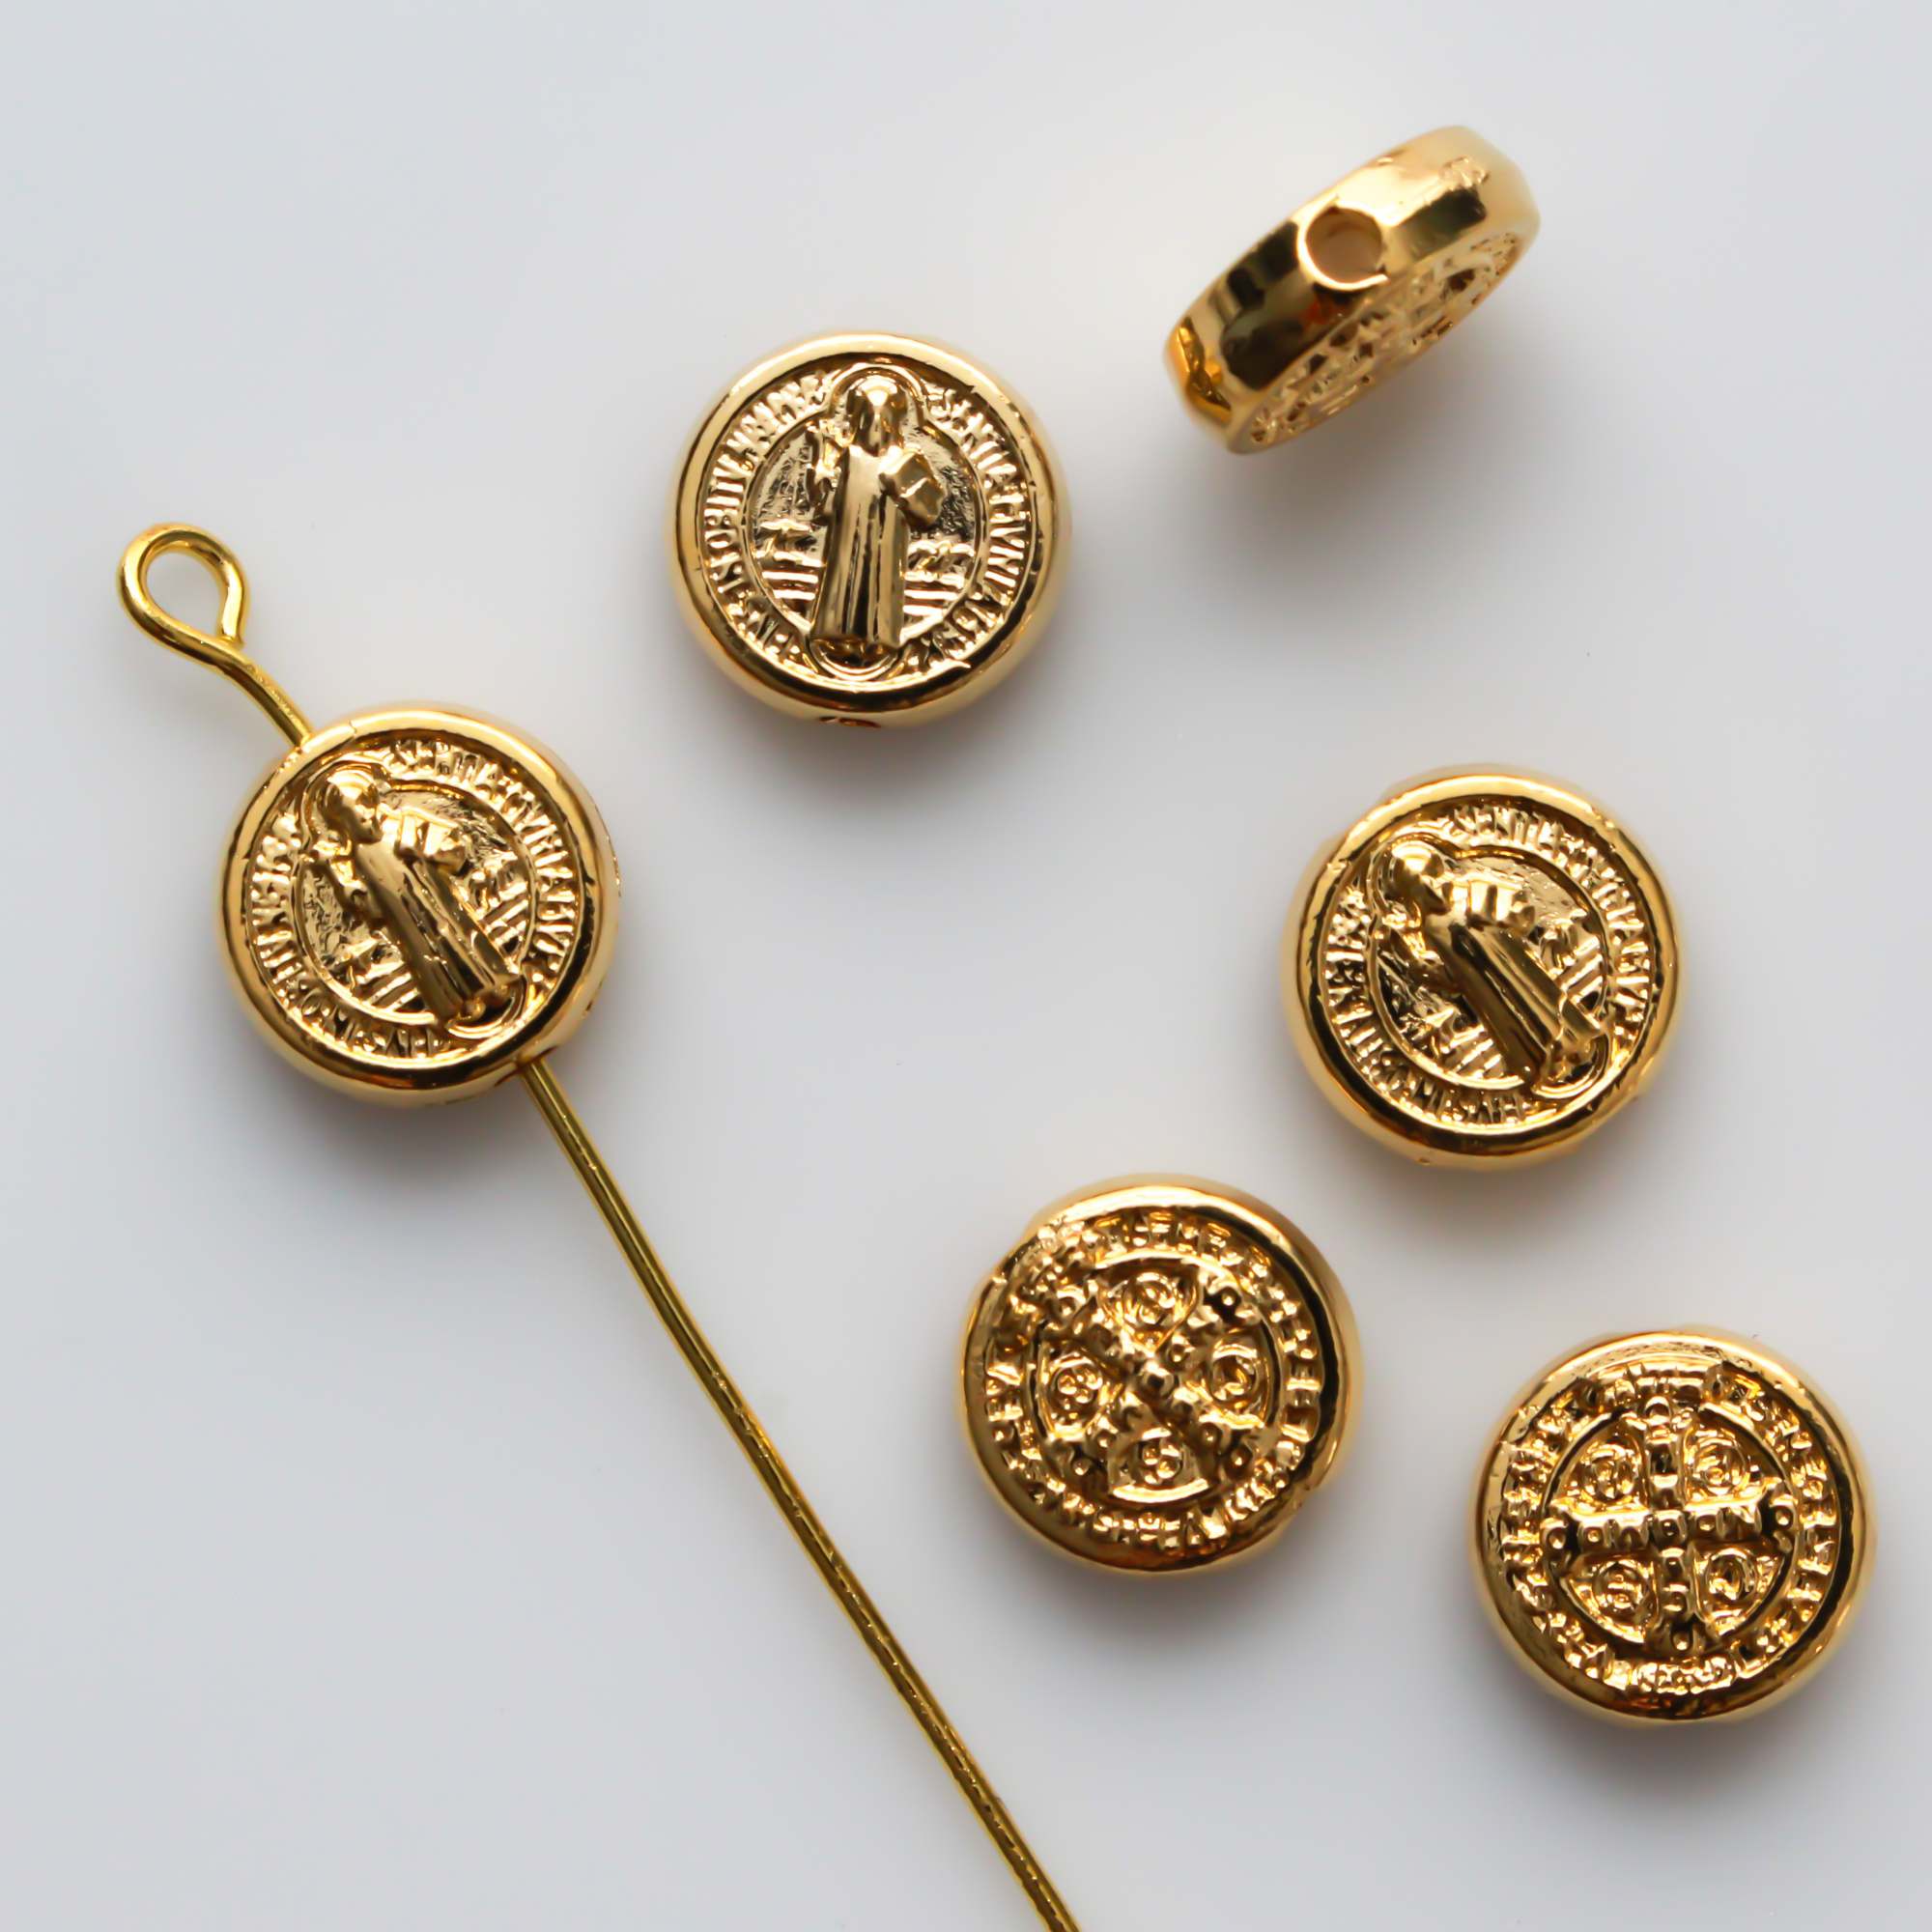 Saint Benedict Medal round flat beads that a gold plated with an alloy base metal, made in Italy